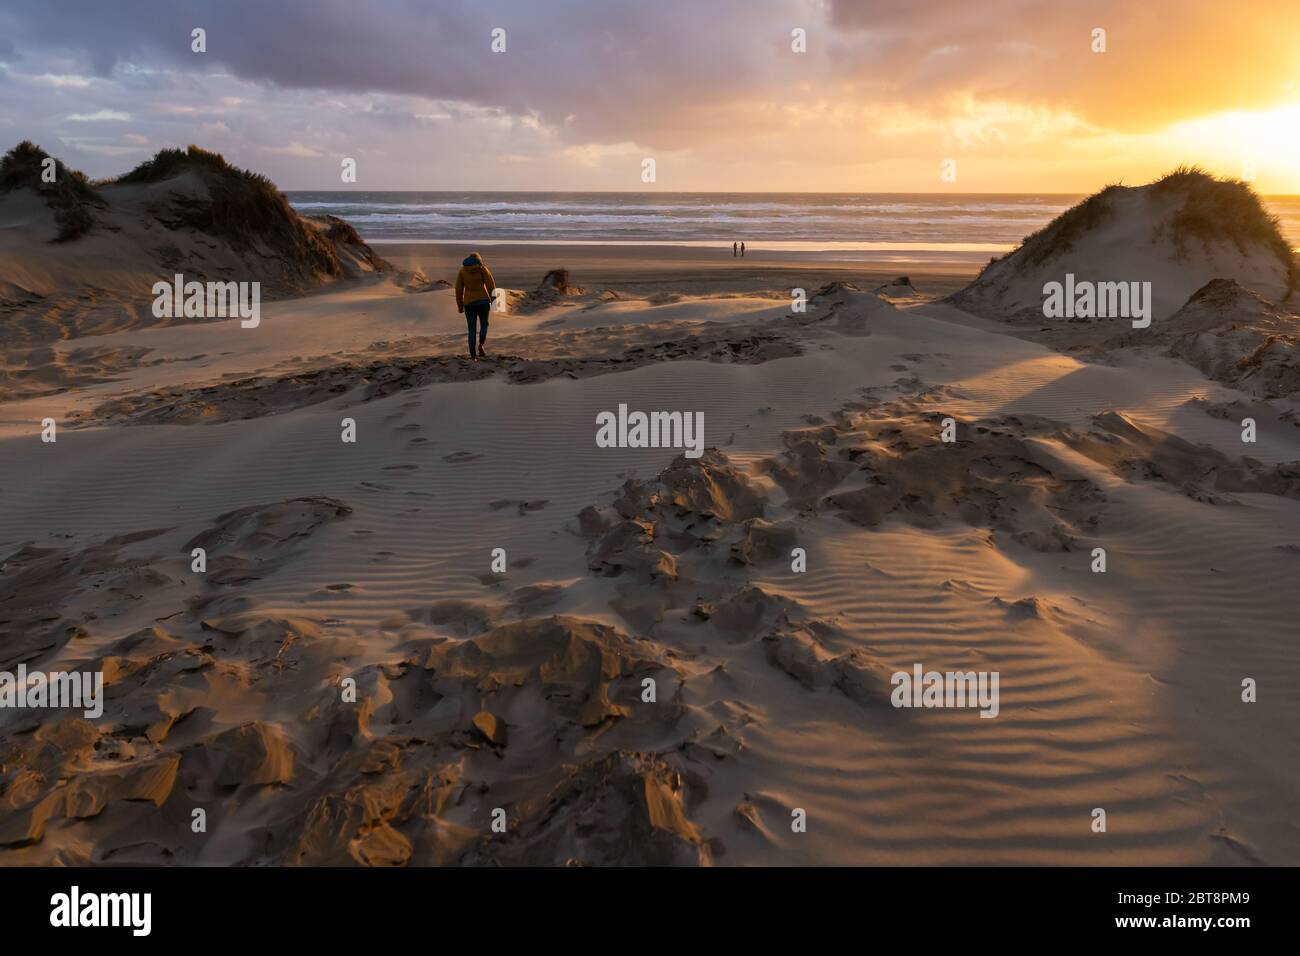 A woman heads to 90 mile beach at sunset, 90 mile beach, New Zealand, October 2019 Stock Photo